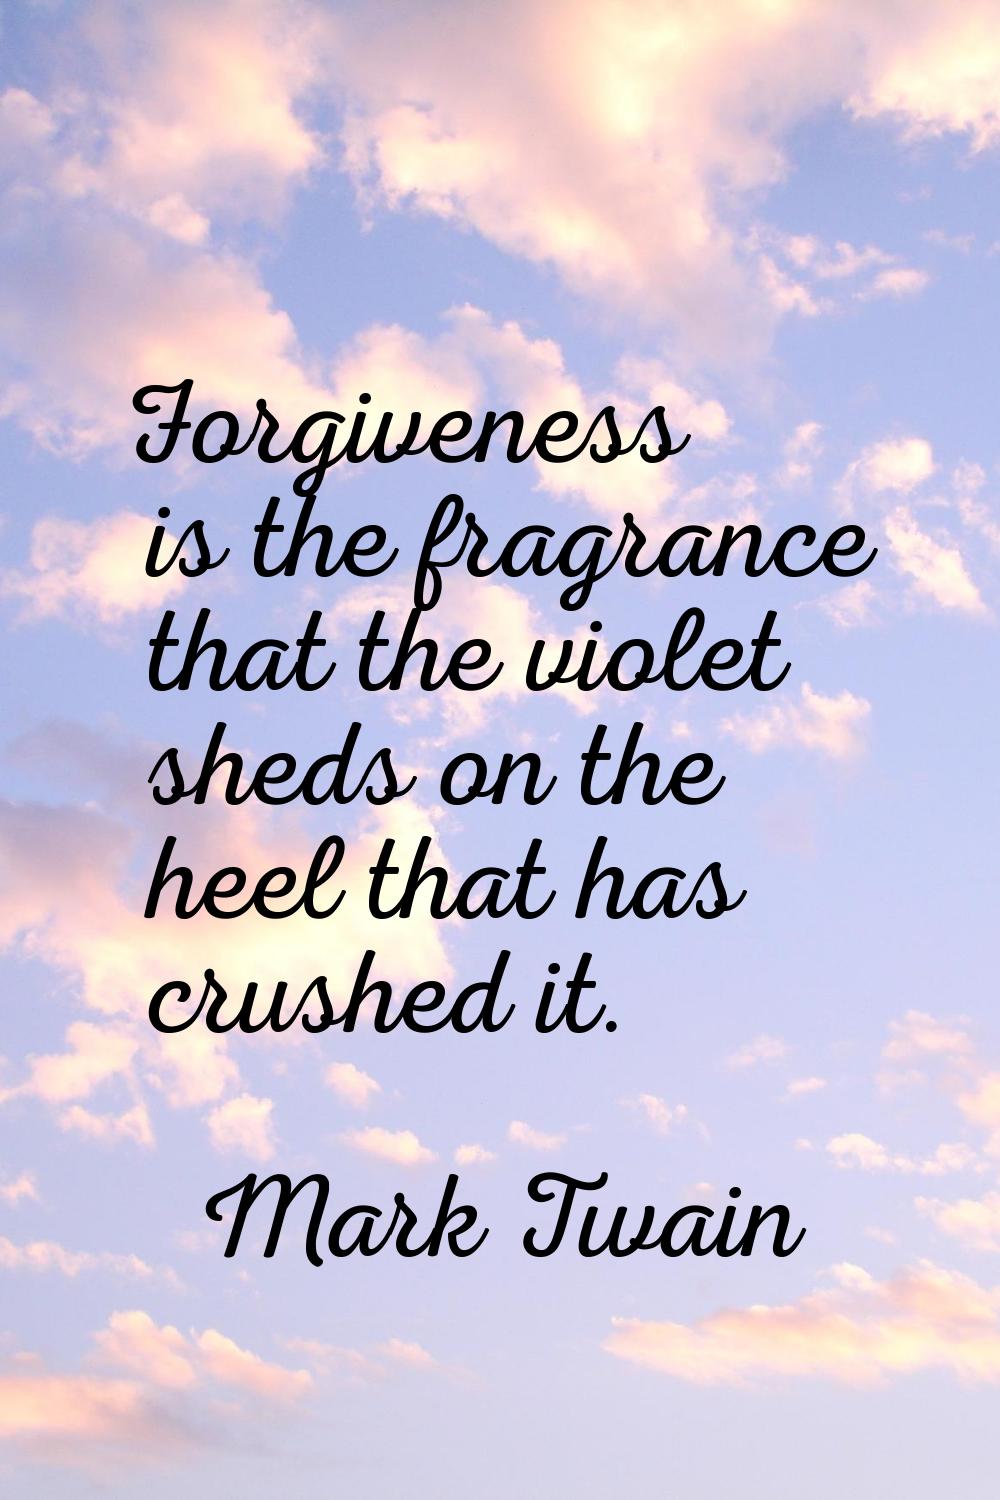 Forgiveness is the fragrance that the violet sheds on the heel that has crushed it.